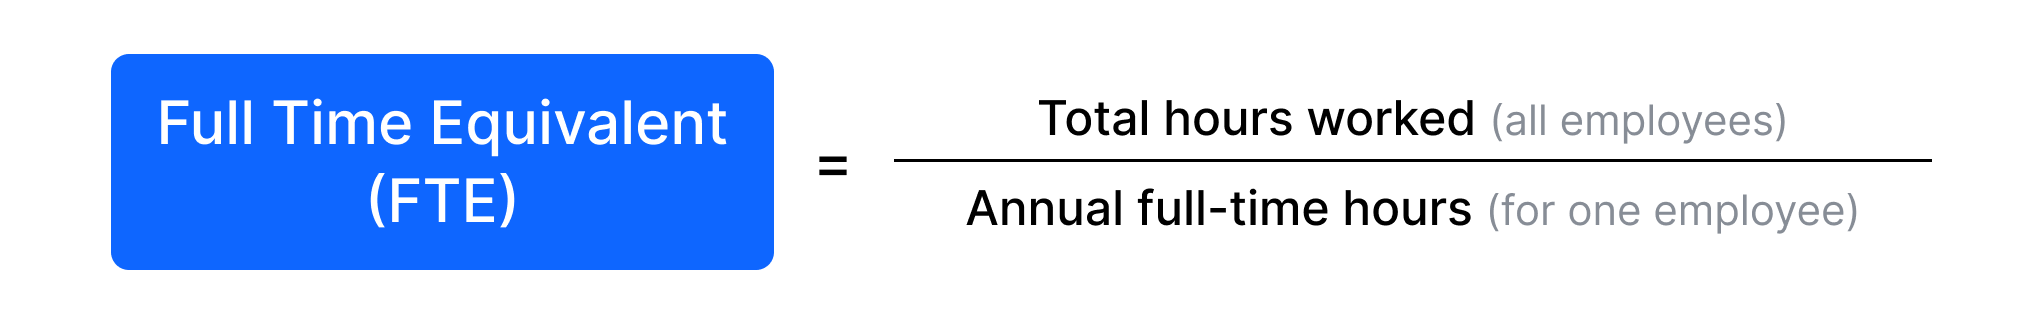 Full time equivalent (FTE) = total hours worked / annual full-time hours